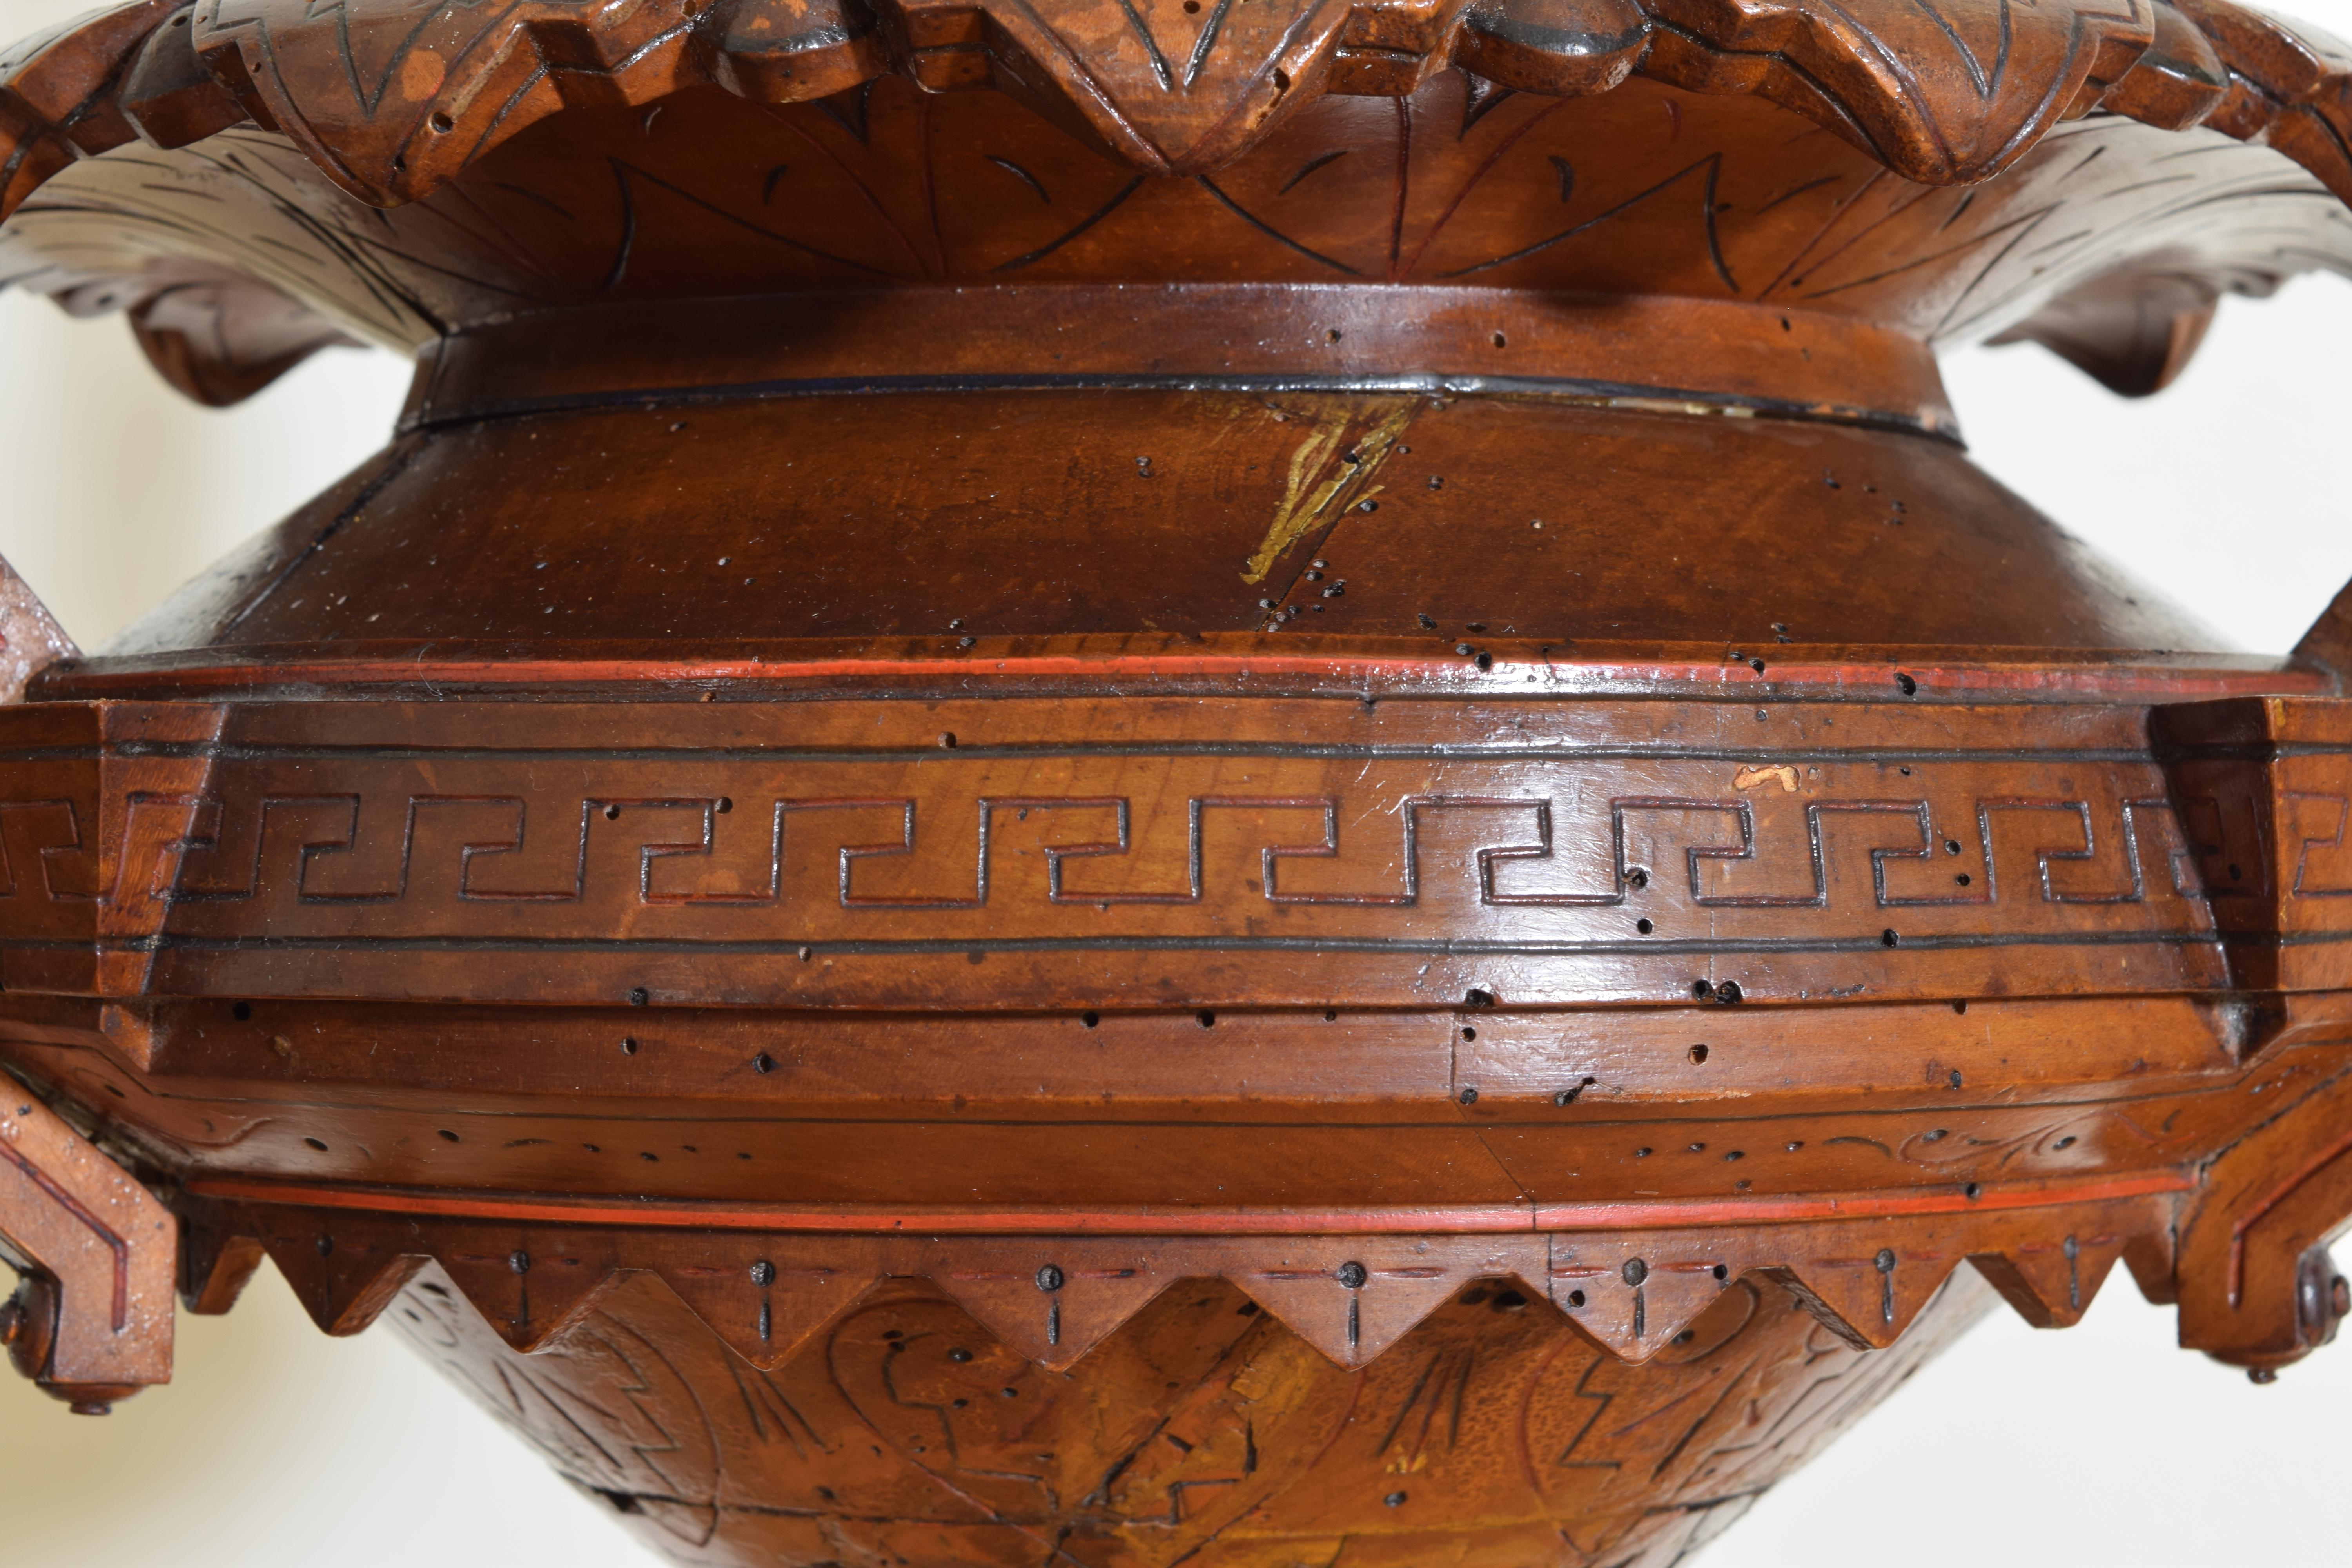 Italian, Milanese, Etruscan Revival Carved Wood Vessels/Lanterns (2 Available) For Sale 2